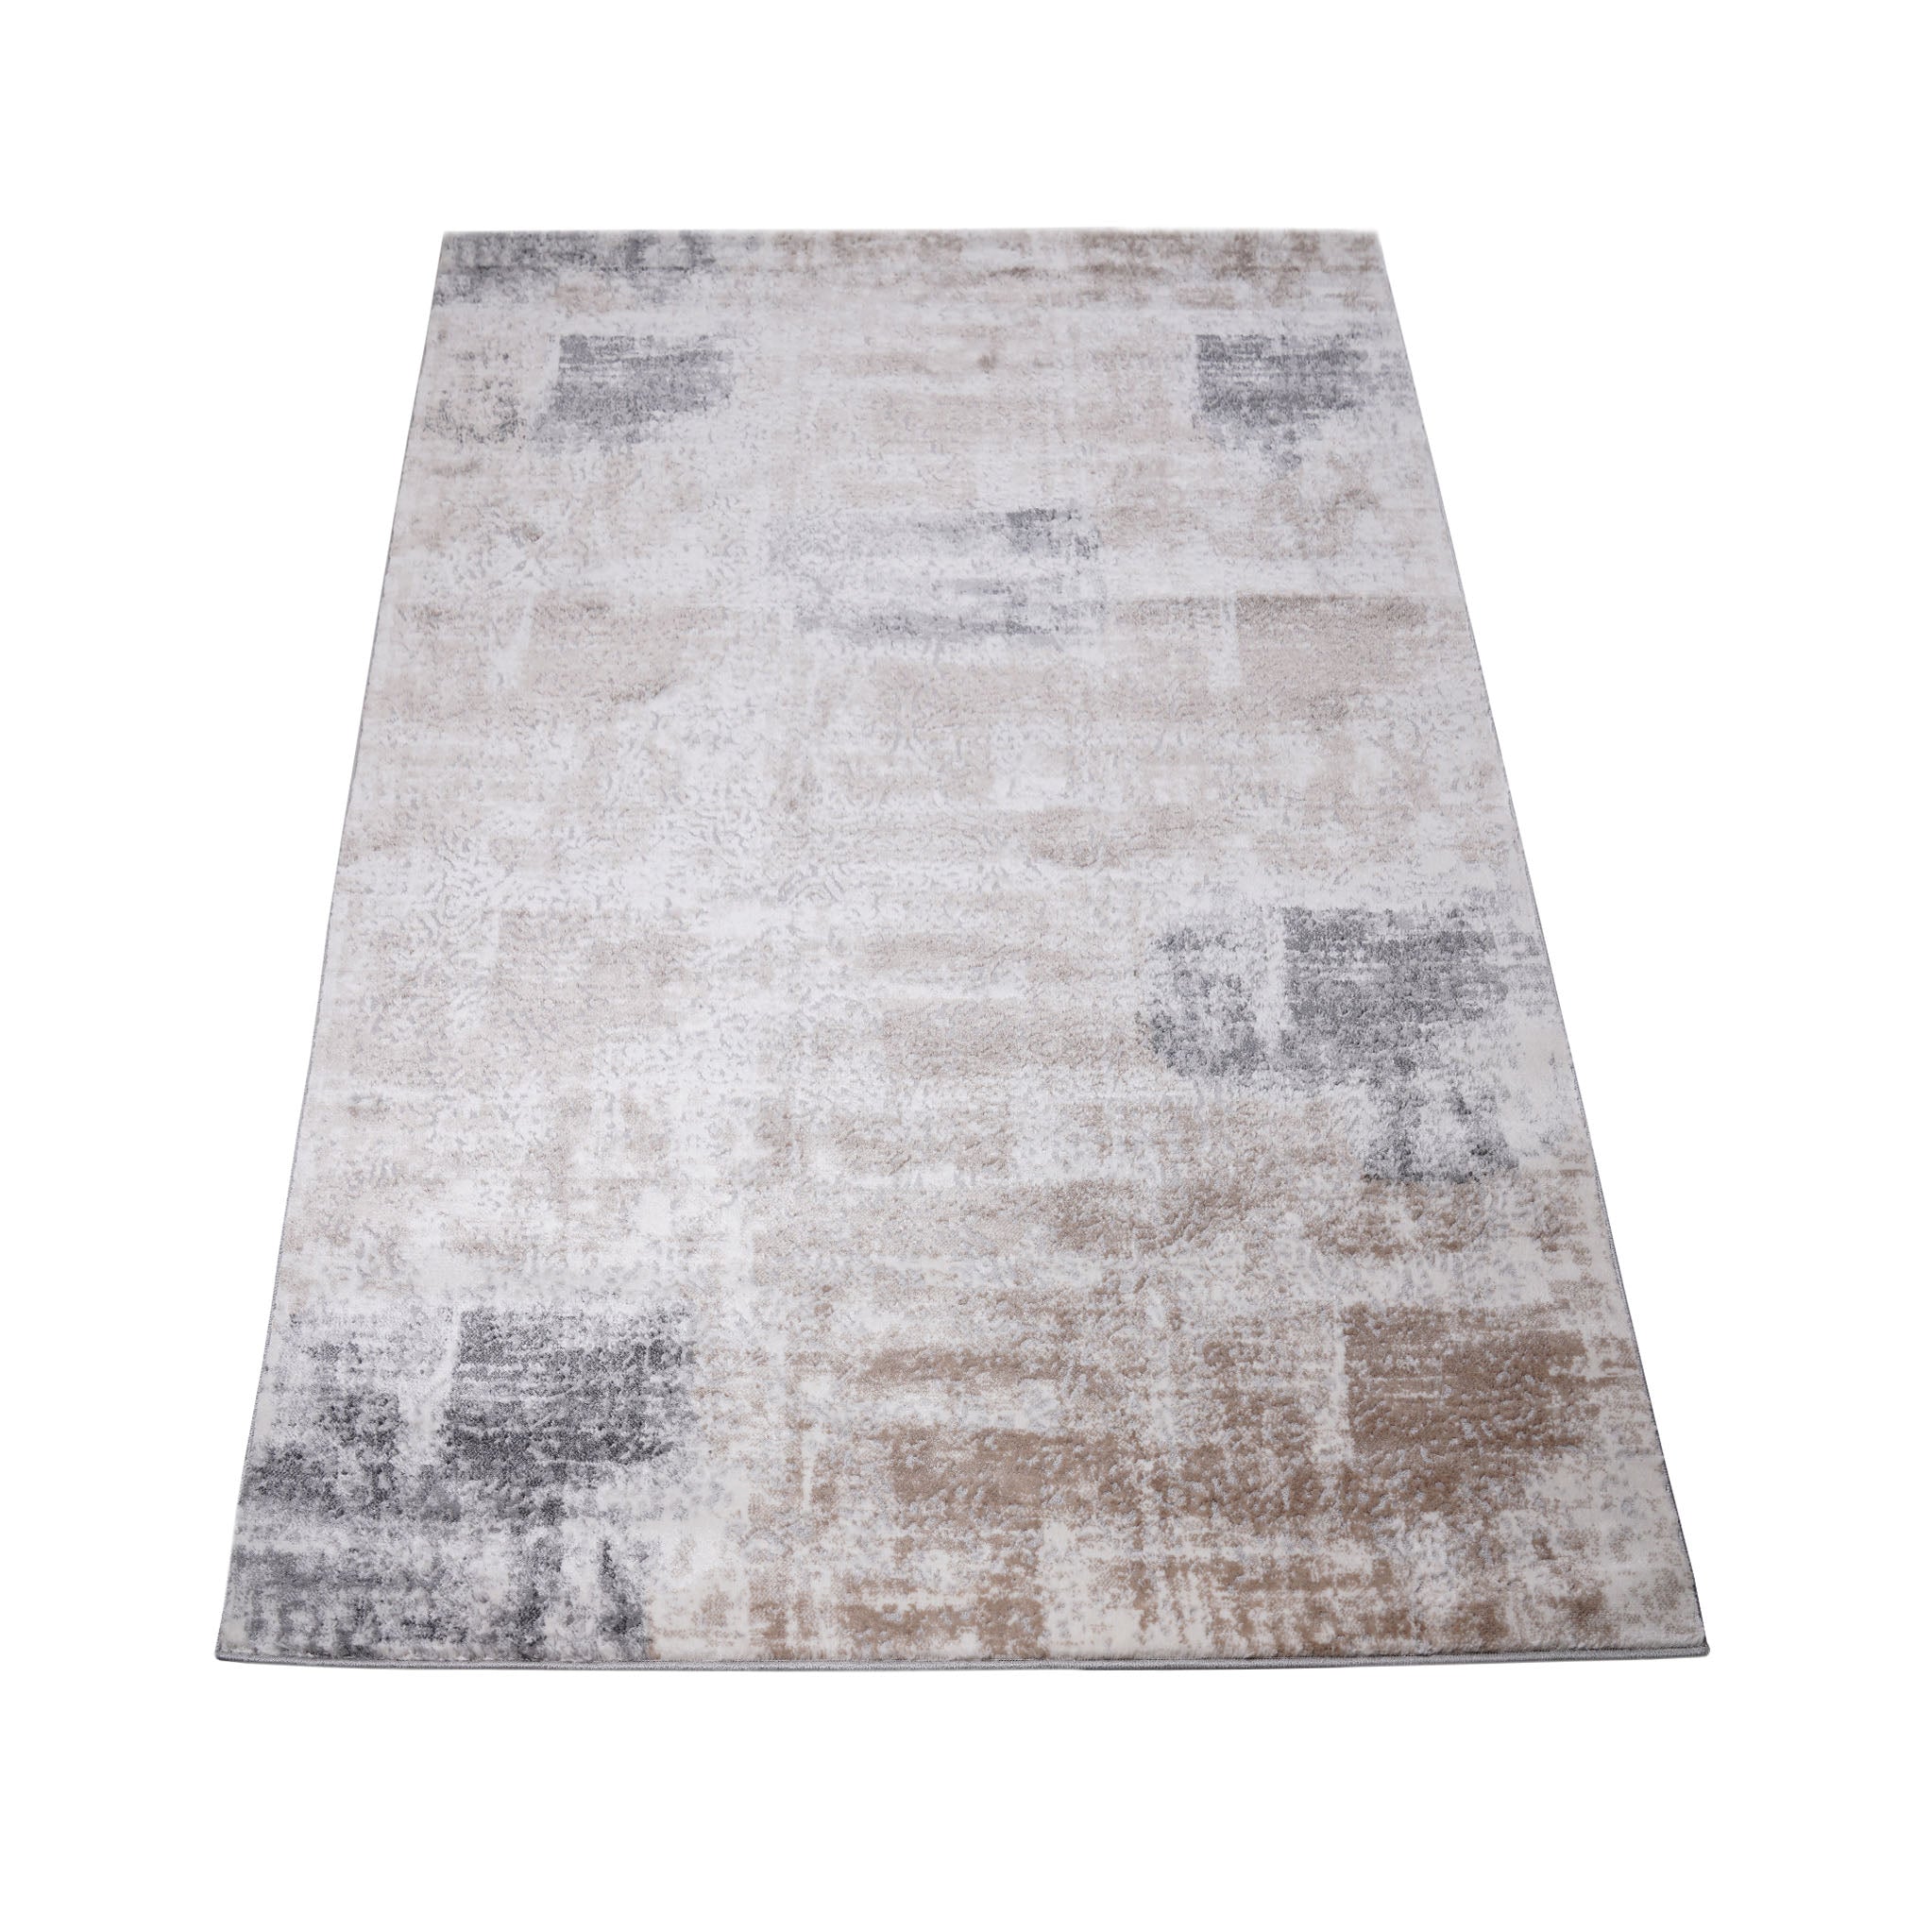 Parla Modern Chic Abstract Rug For Living Room Of Hallway Roseland